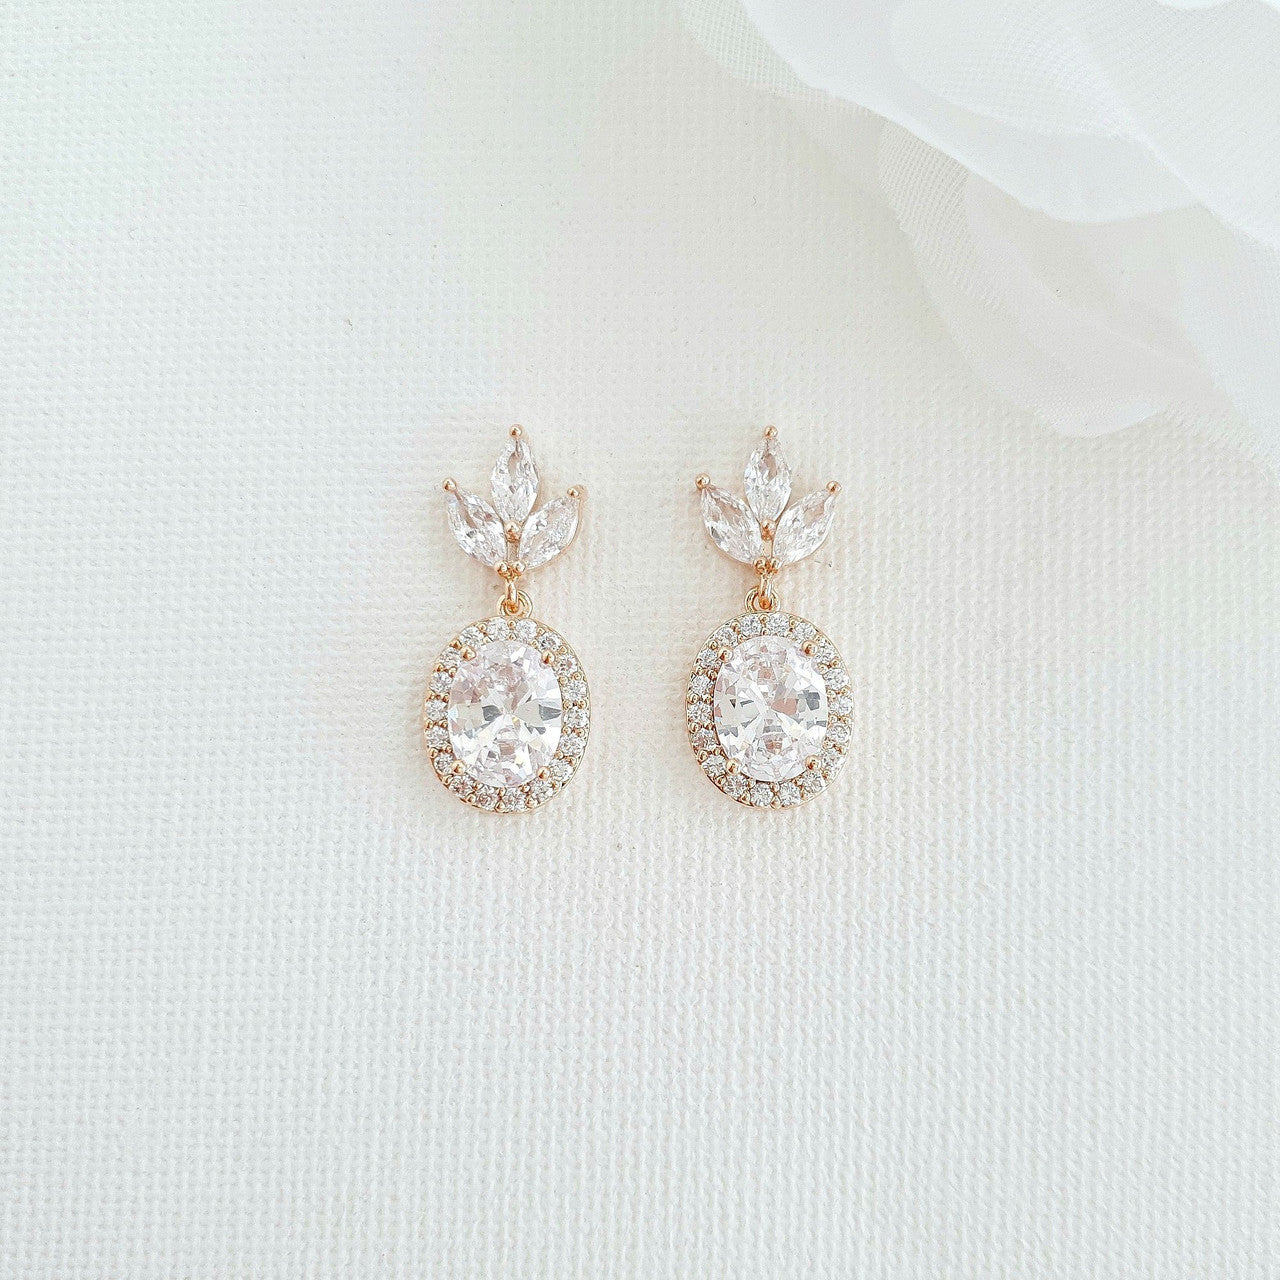 Small Earrings and Necklace Bridesmaid Jewelry Set- Emily